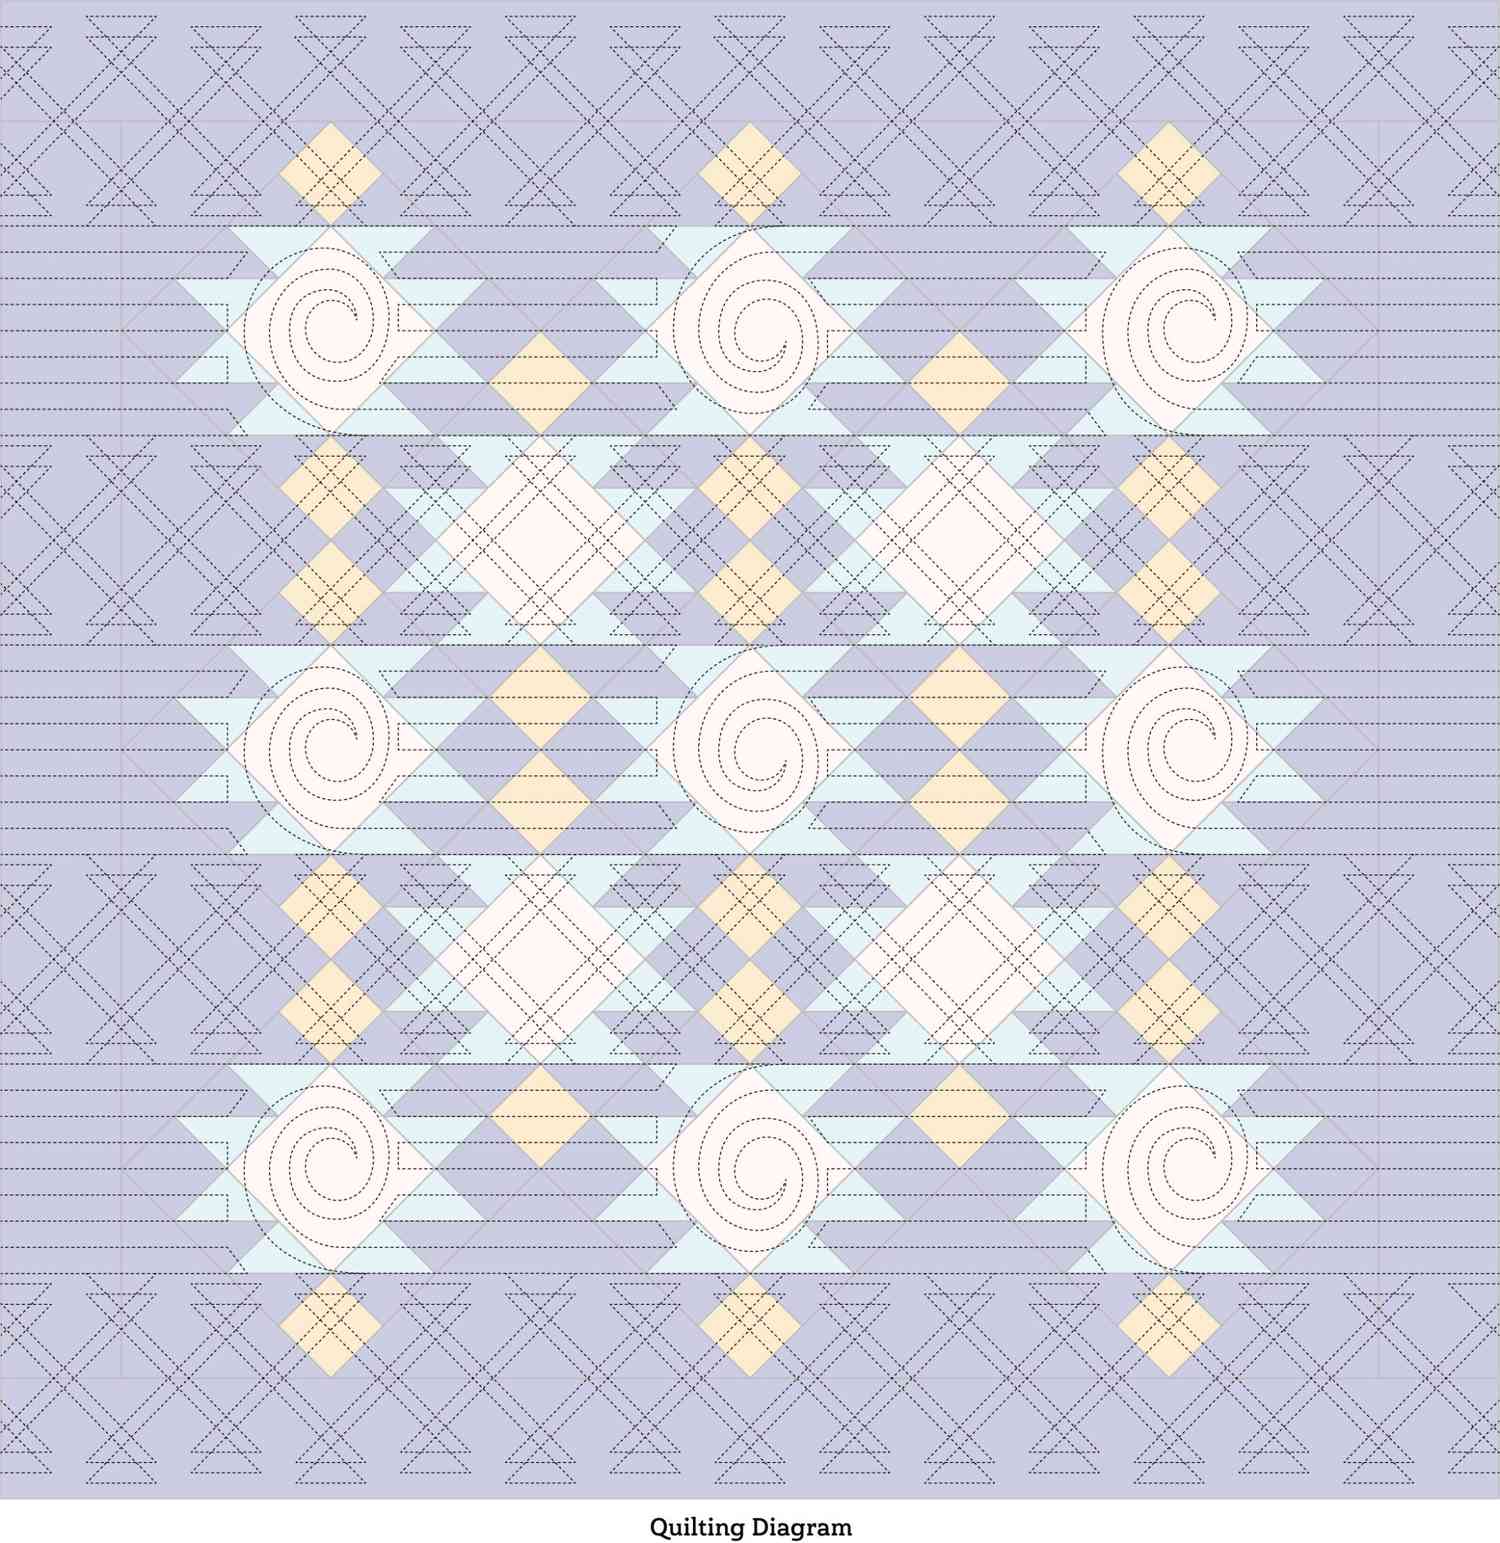 Southwest Solids Wall Quilt